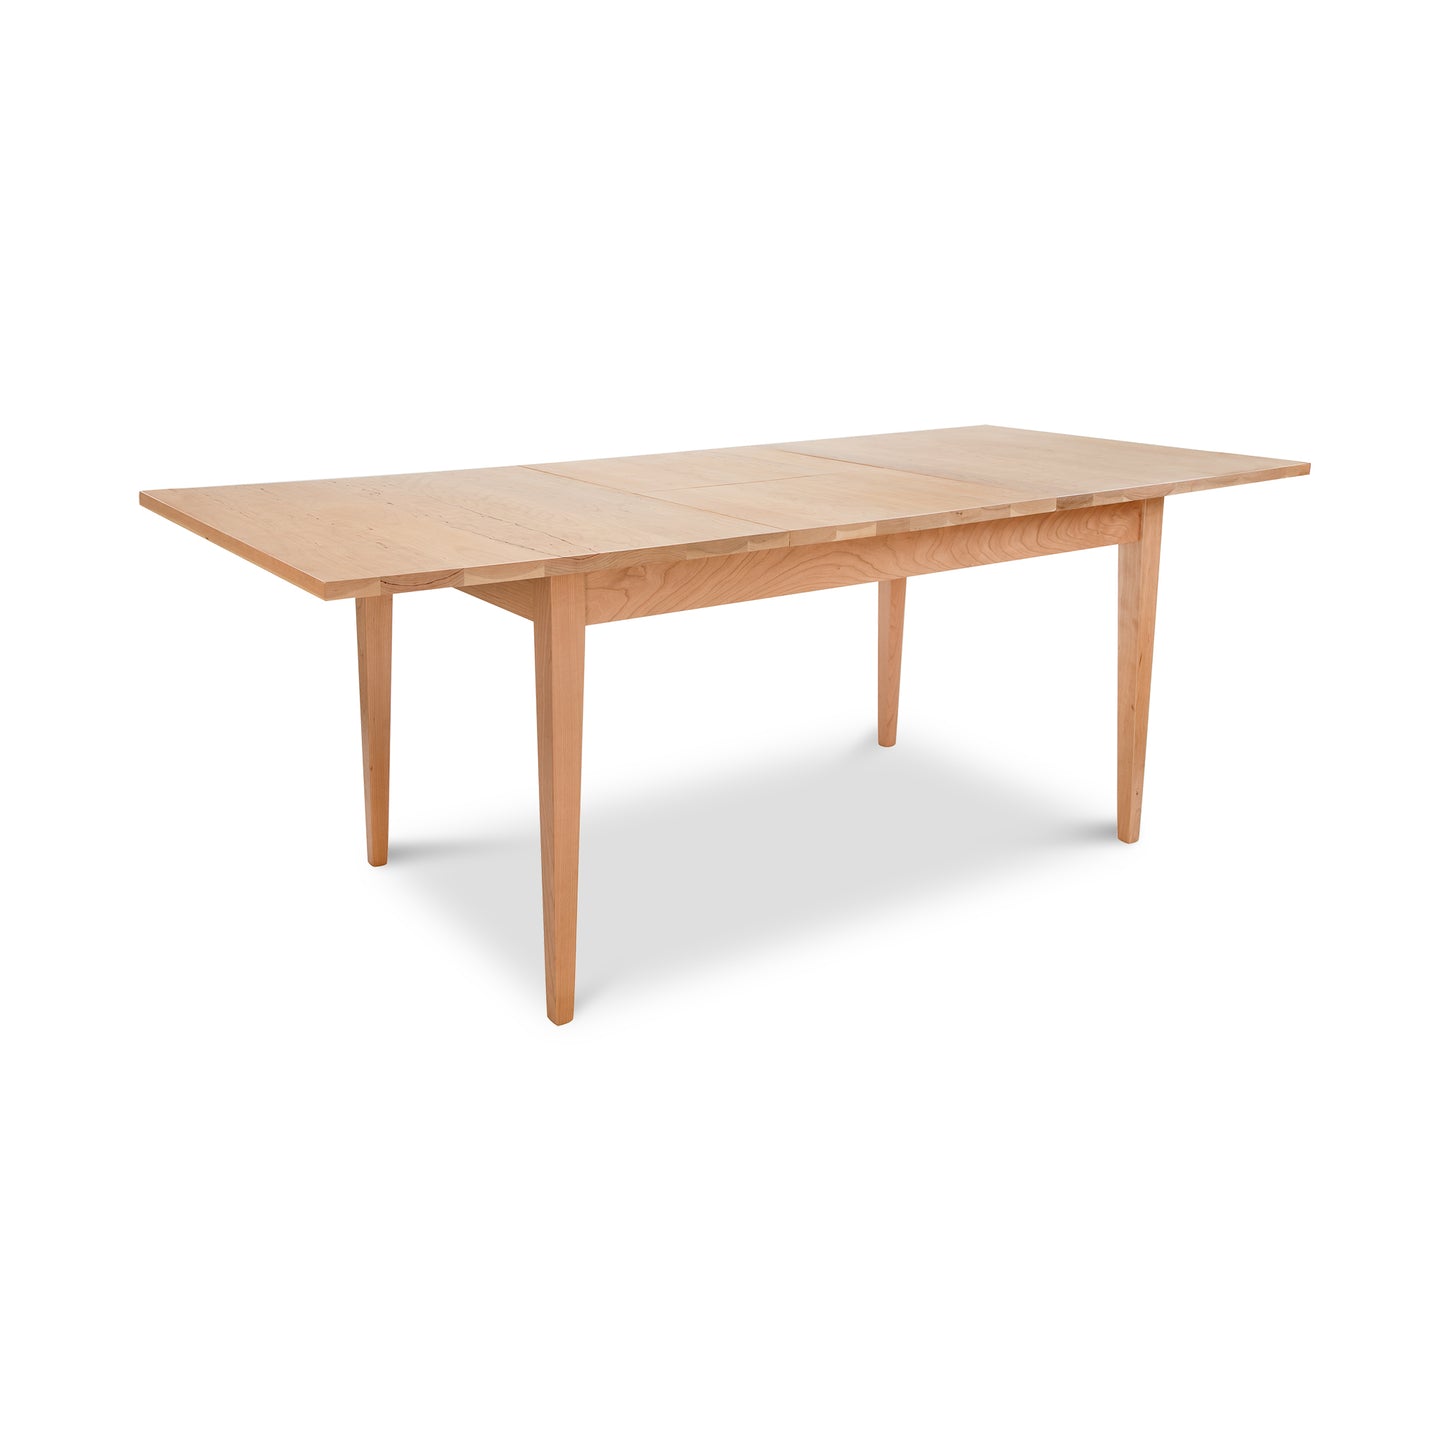 A Classic Shaker Butterfly Extension Table from Lyndon Furniture with shaker furniture styling.